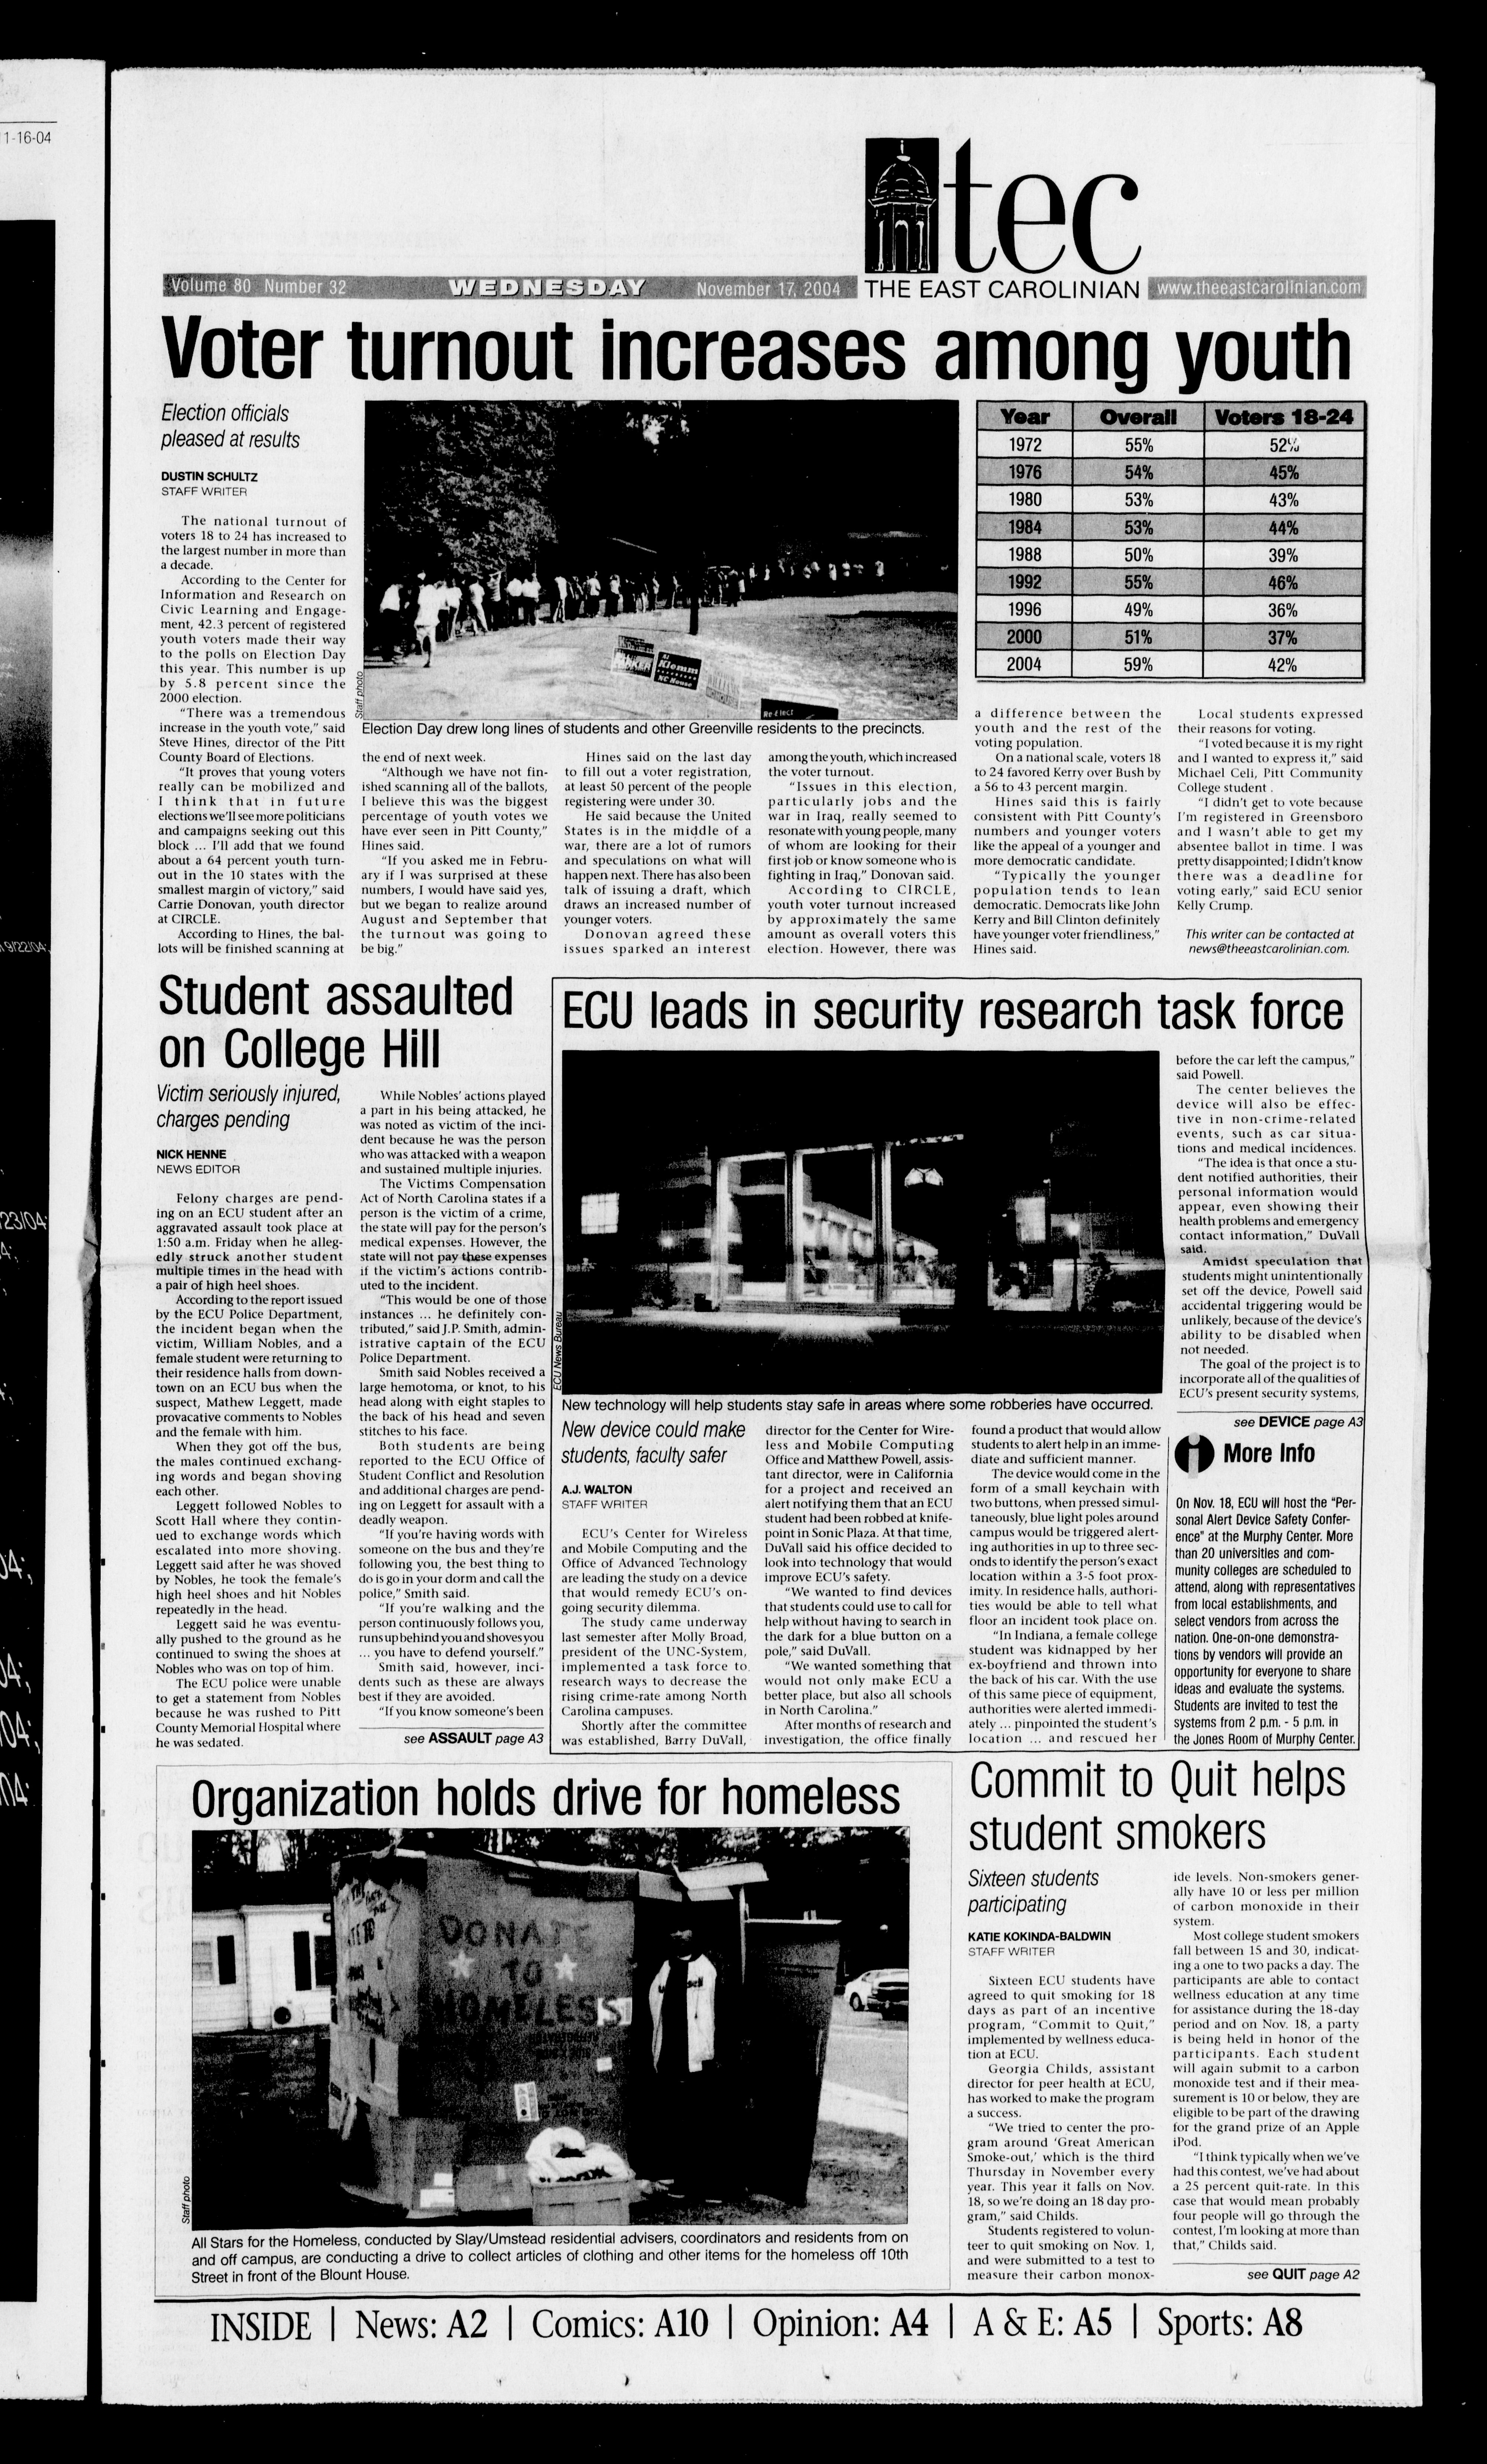 The East Carolinian, November 17, 2004 picture